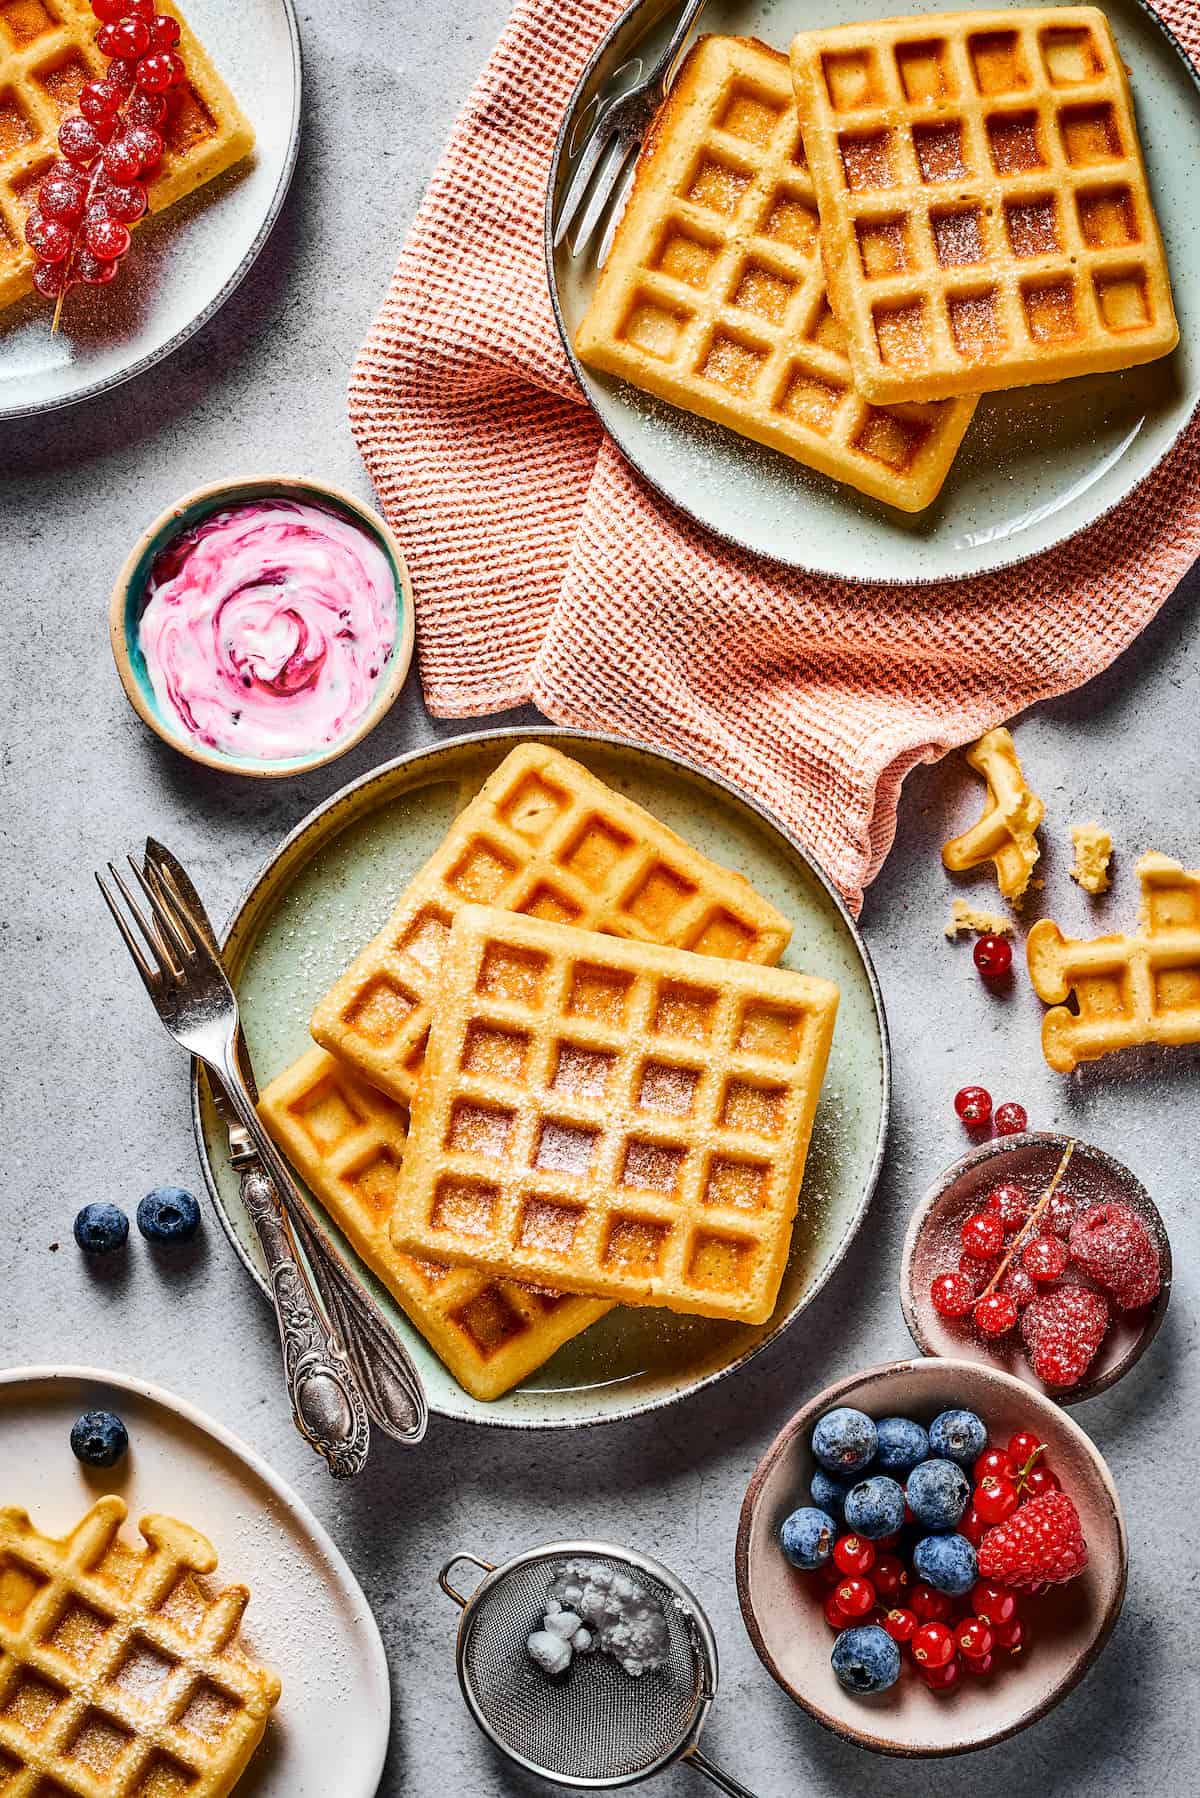 A tablescape with fresh fruit, homemade waffle recipe, and cloth napkins.